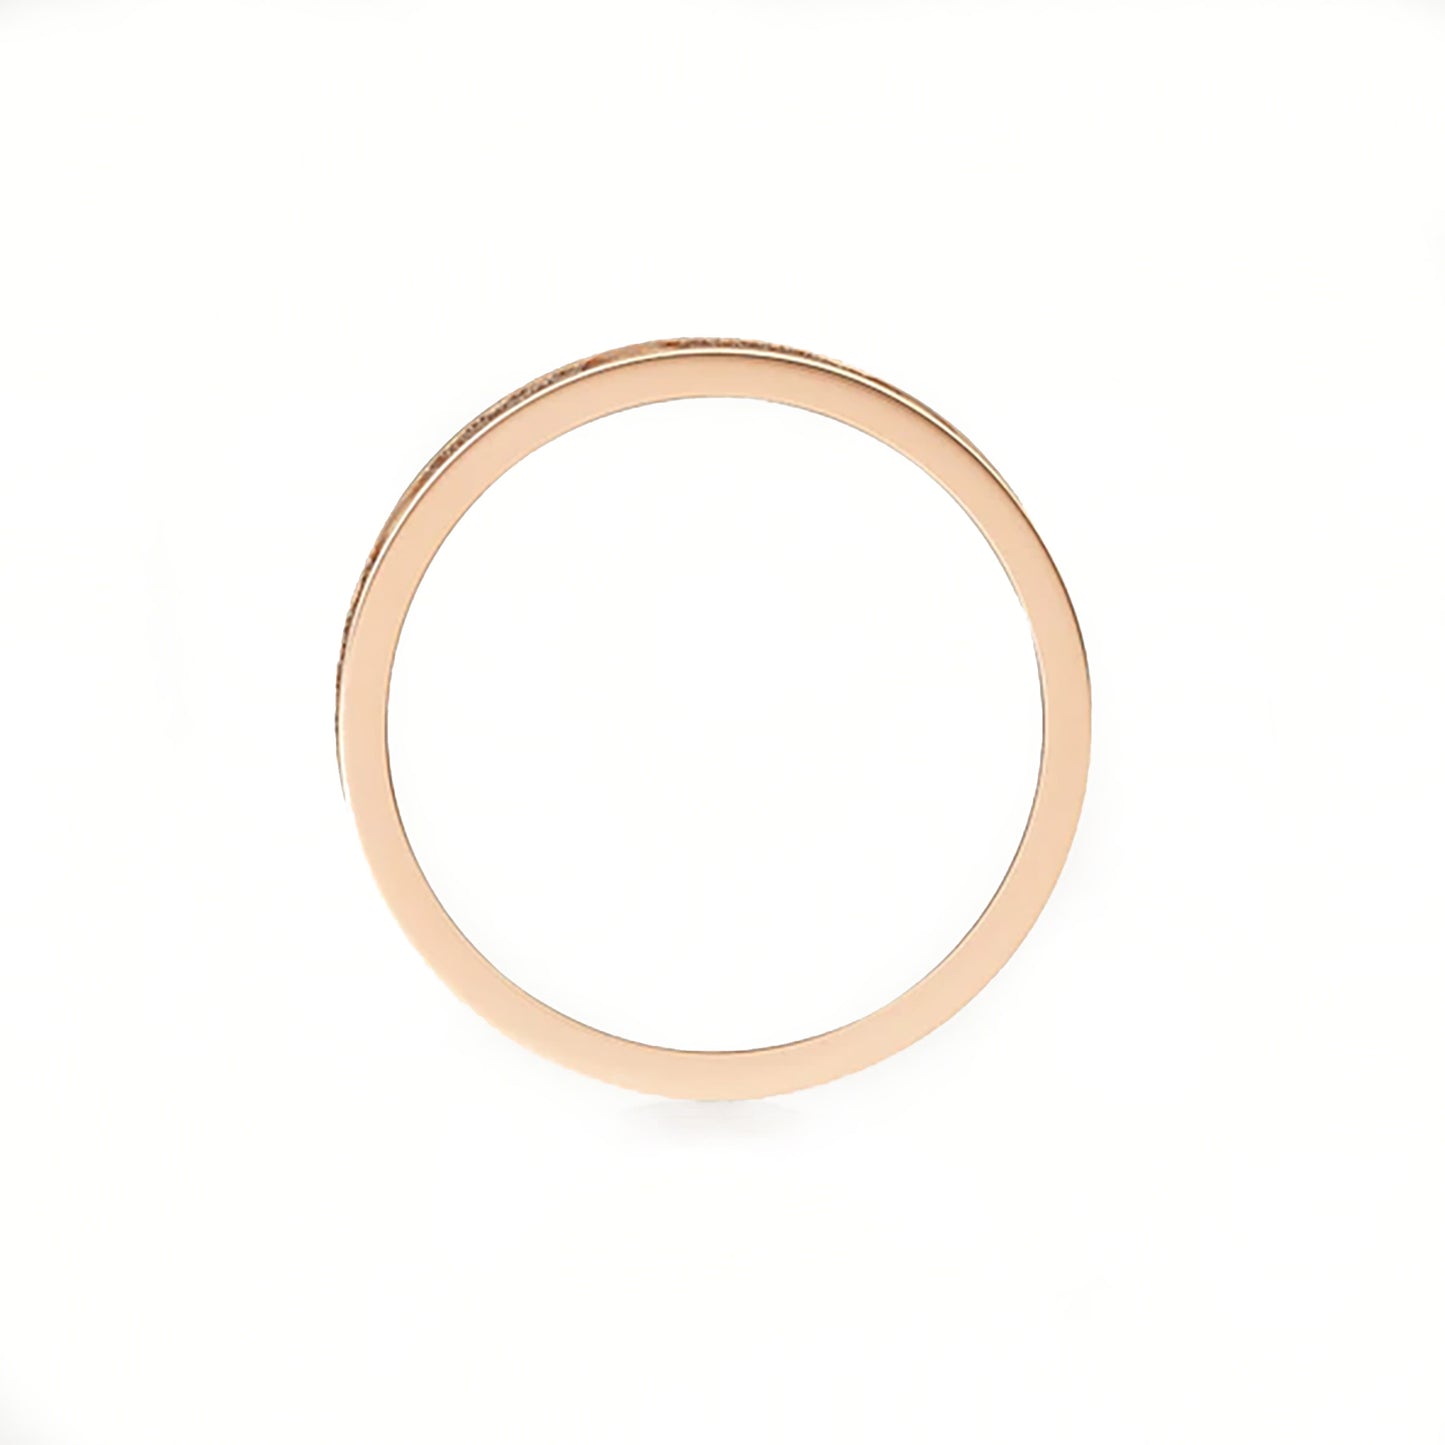 Load image into Gallery viewer, Cartier Love Diamond Wedding Band
